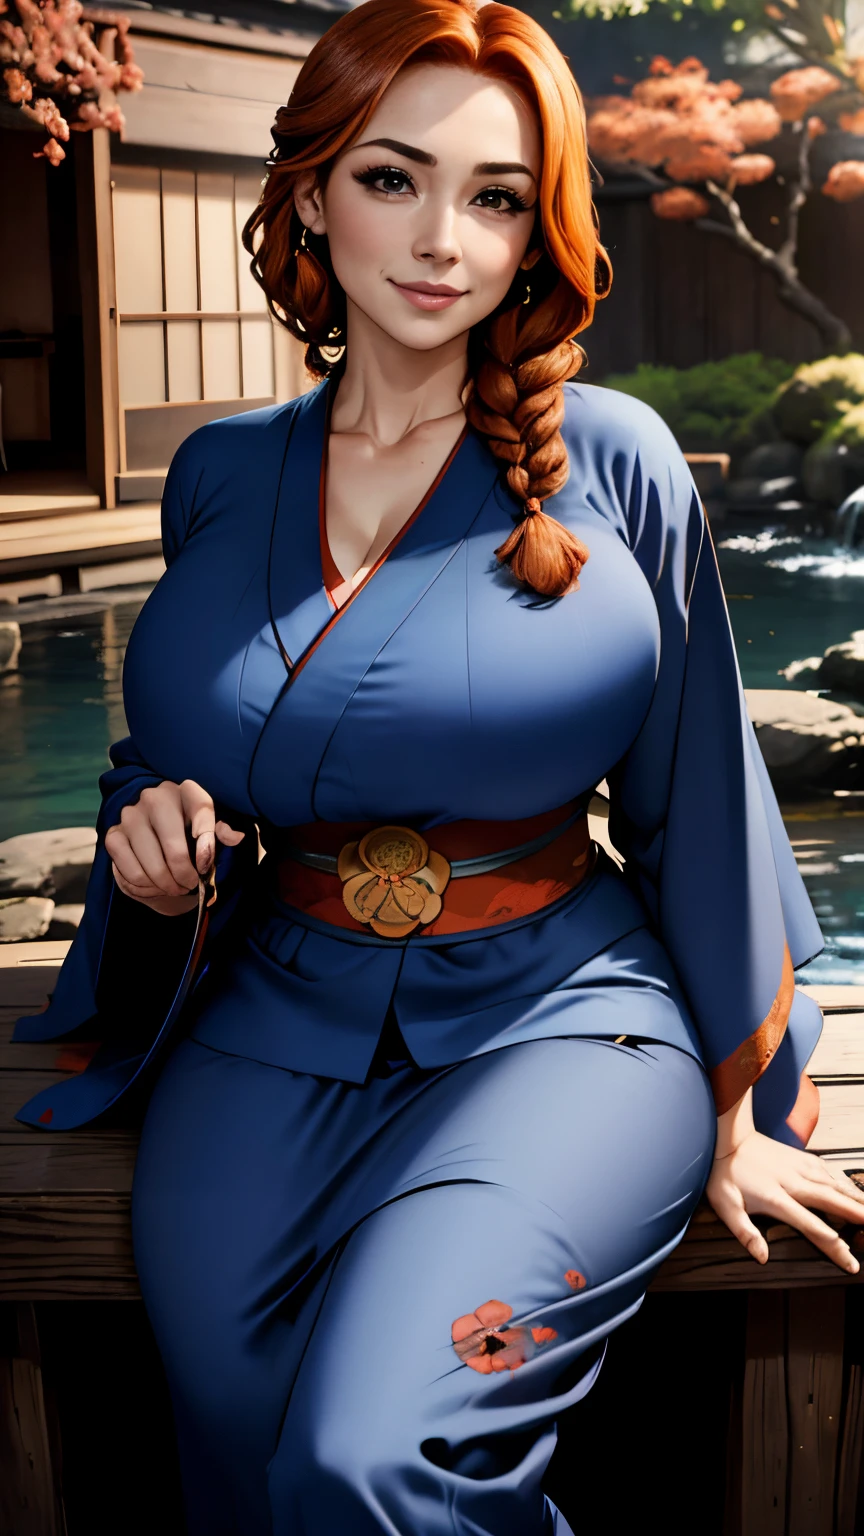 a picture of (1 woman), a 40-year- old Scottish woman, in a classic Japanese garden, (((garden scenery))), wearing a loose blue silk kimono with poppy decorations, (((blue kimono))) cinematic, UHD, masterpiece, anatomically correct, textured skin, natural blemishes , wrinkles,super detail, high quality, best quality, award winning, highres, 16k, HD, copper red hair in a braid, downturned brown eyes, broad smile, happy, flirty, ((downturned eyes)), (European), massive breasts